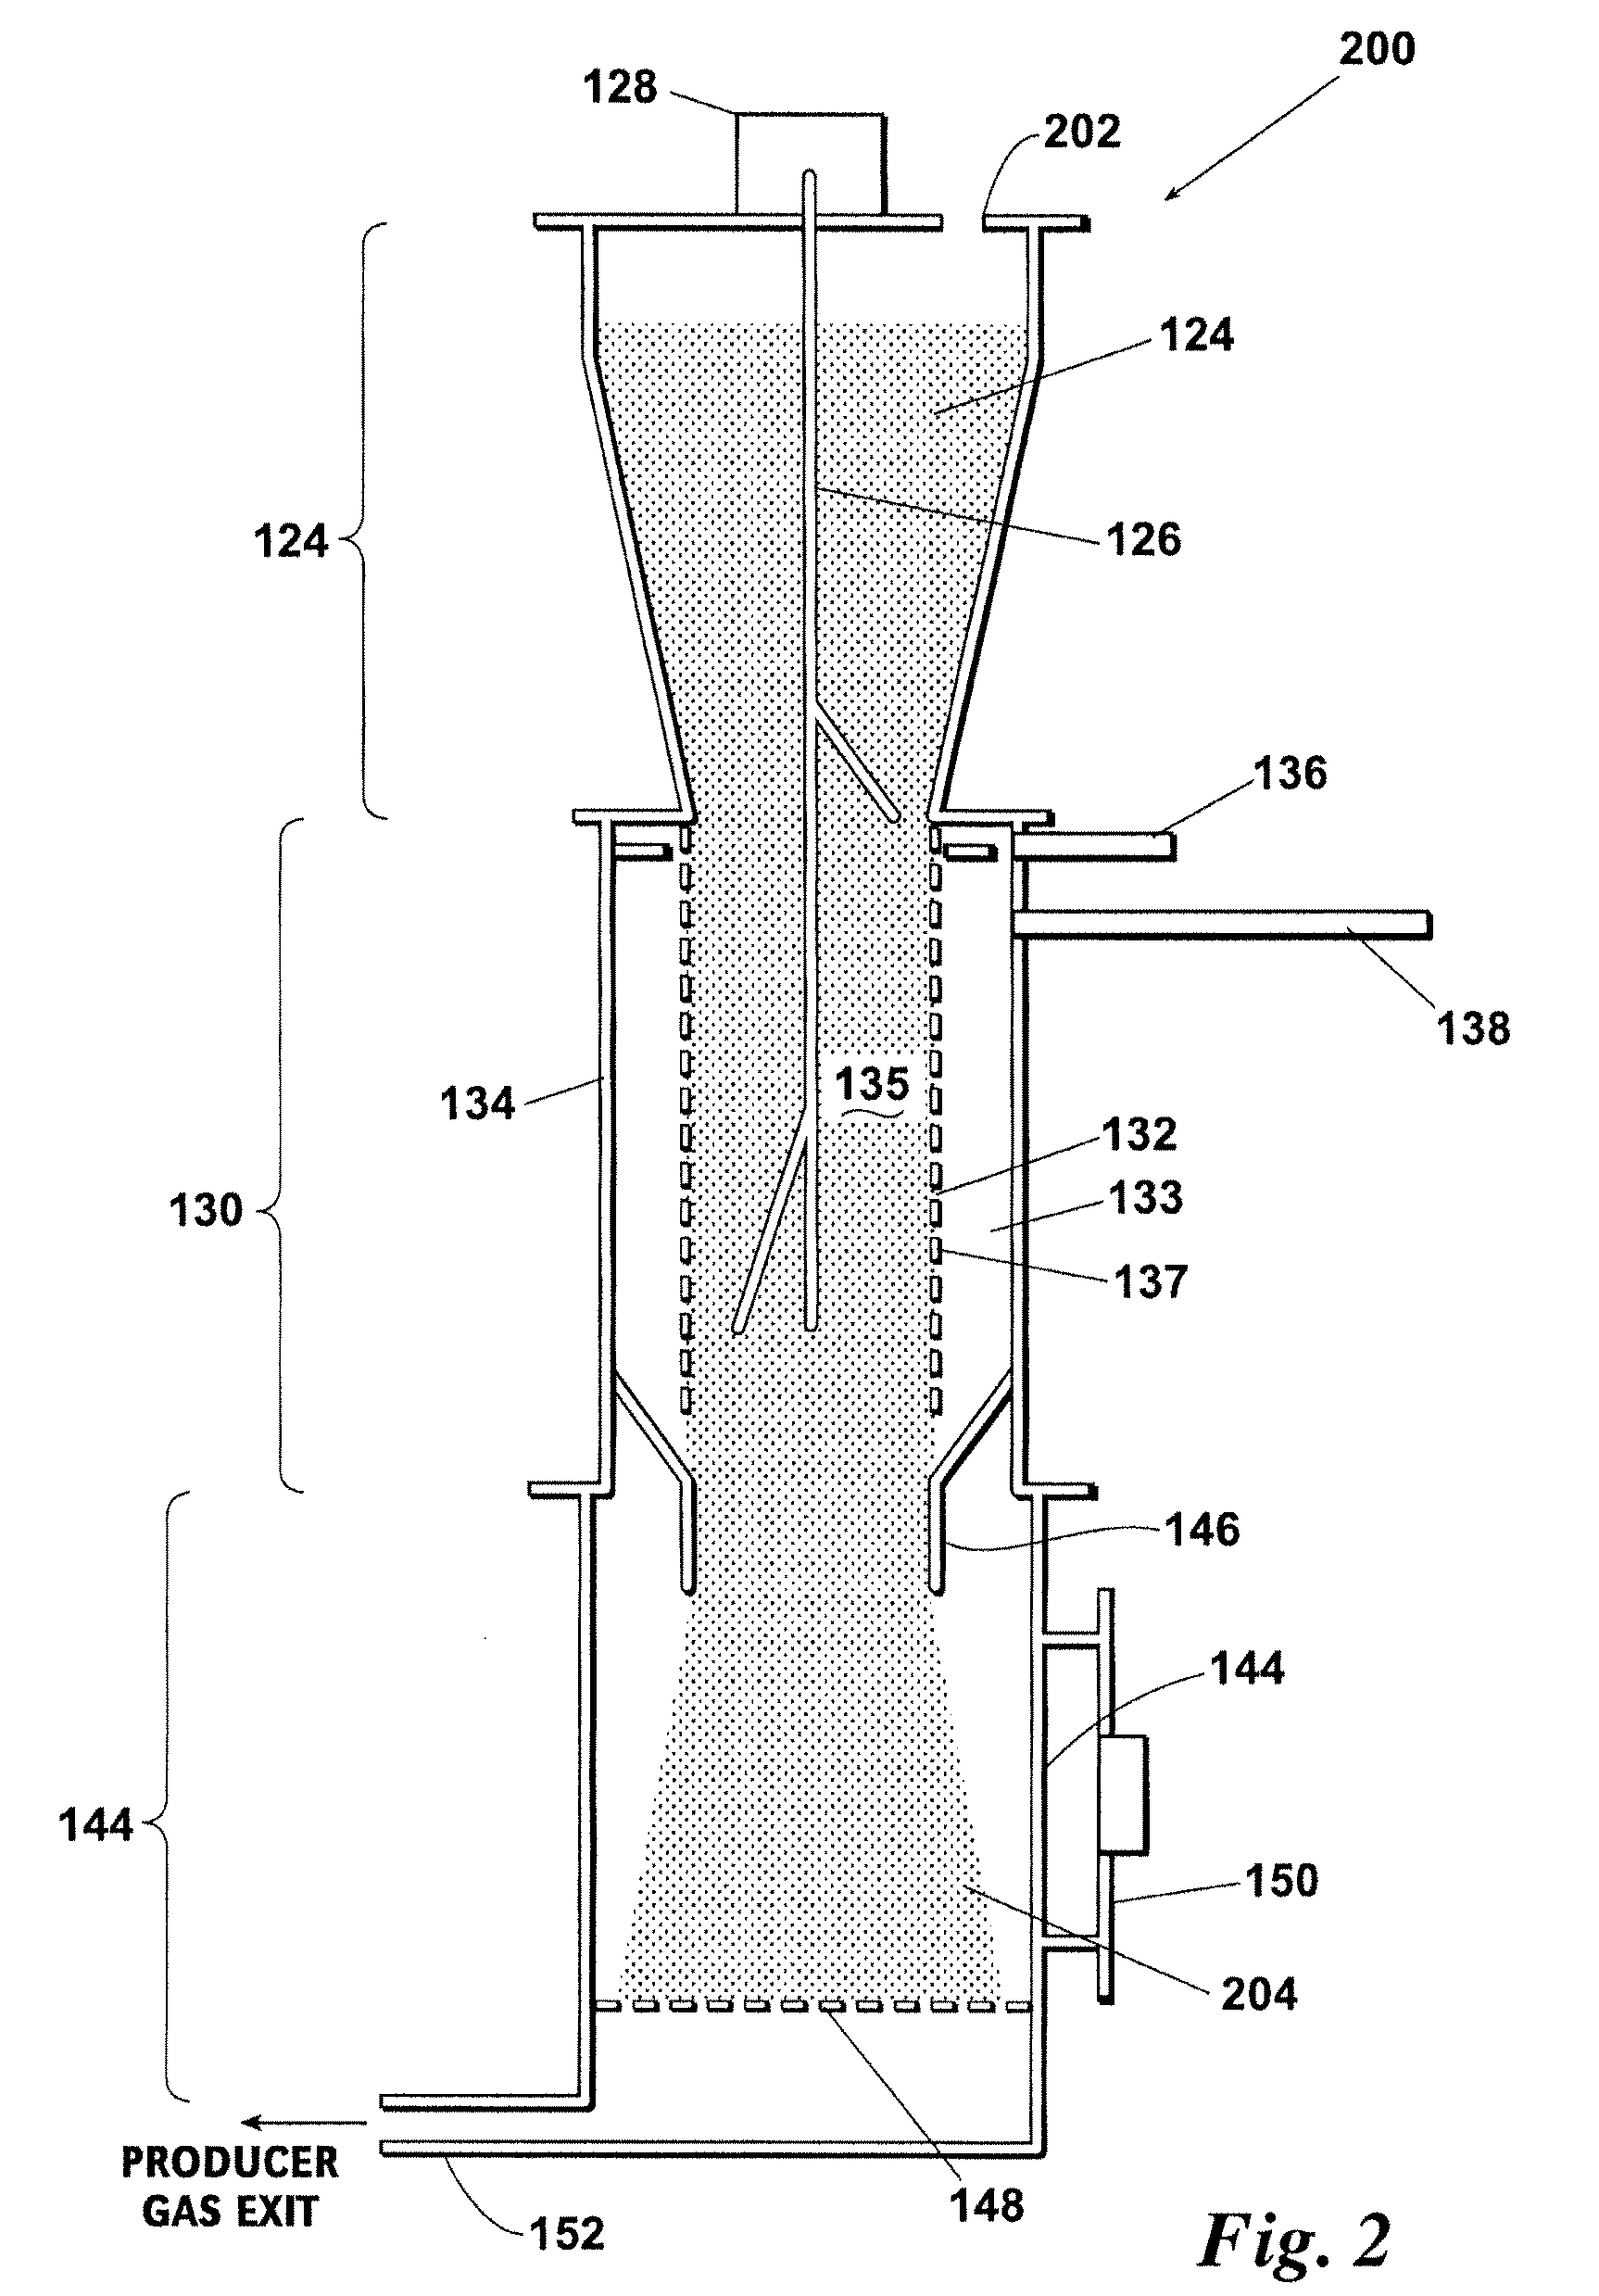 Downdraft gasifier with internal cyclonic combustion chamber